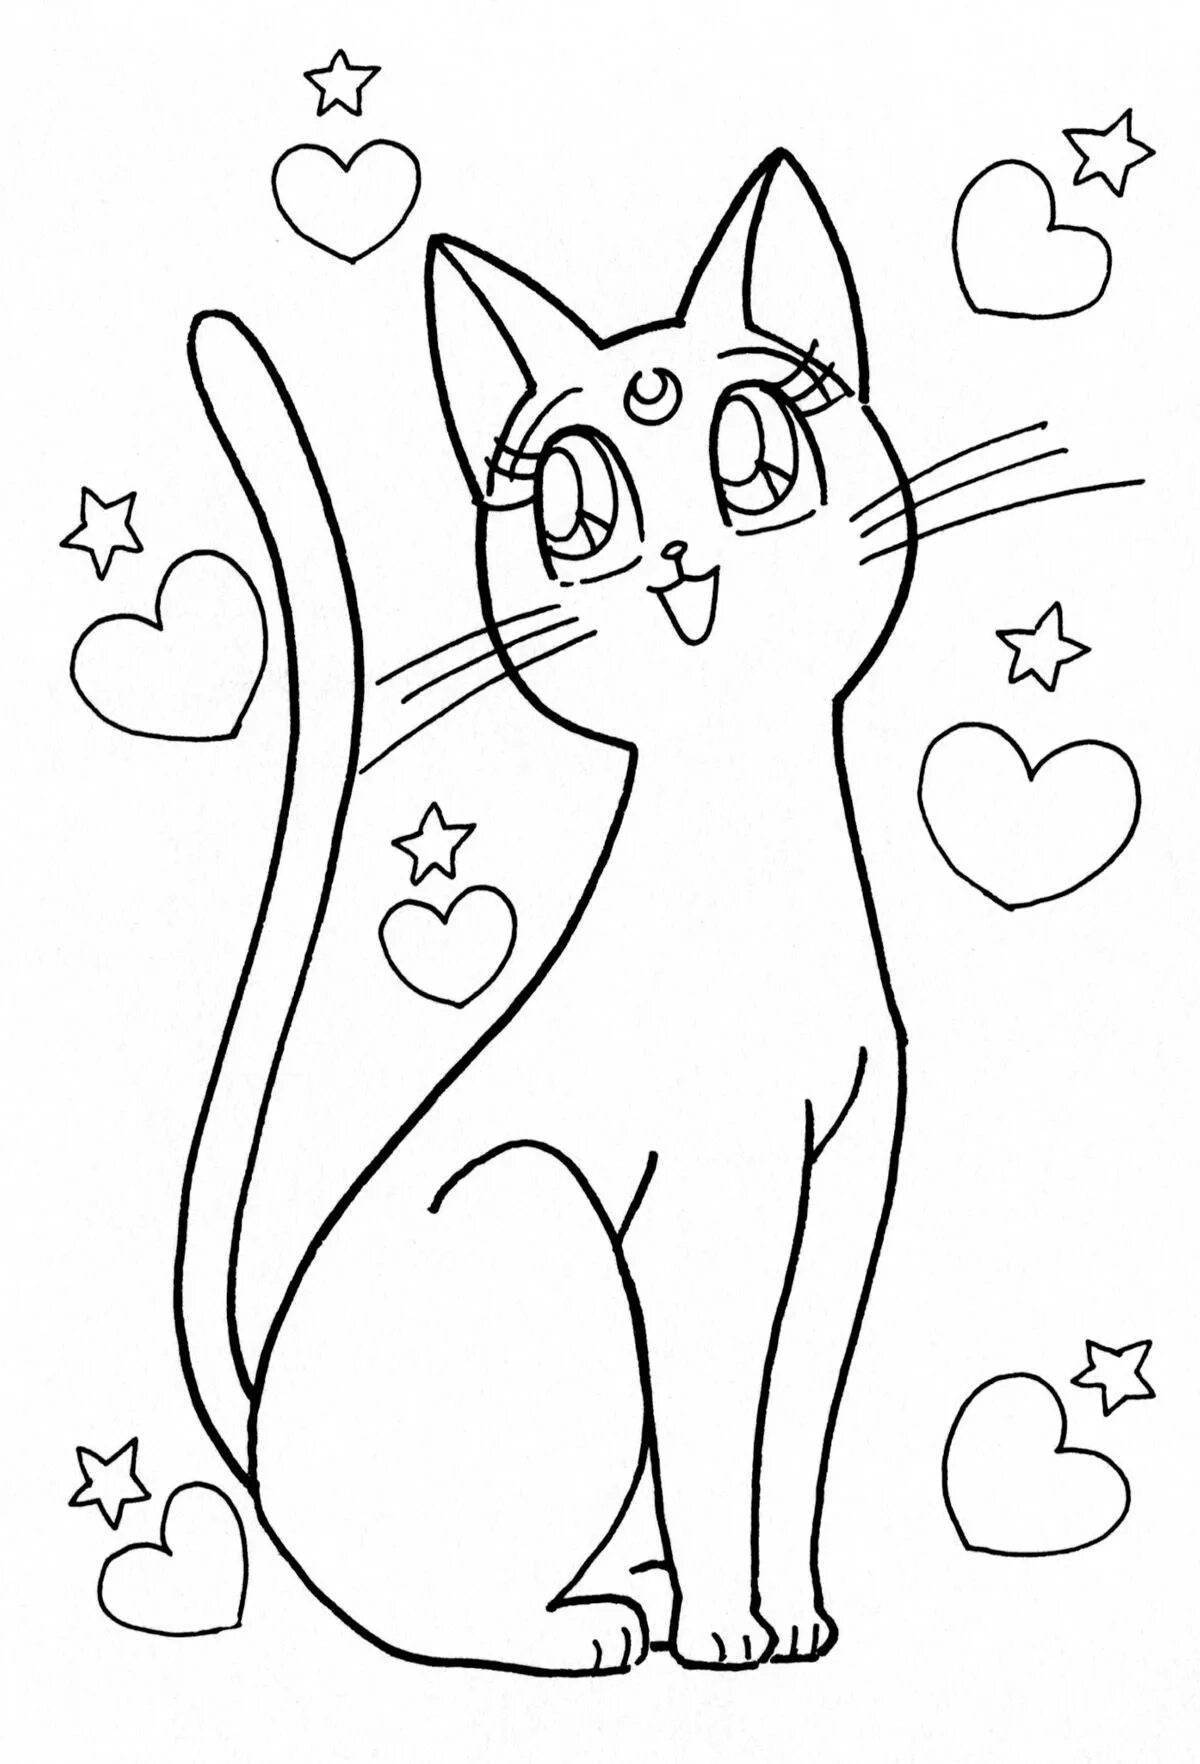 Vivacious coloring page very pretty and light